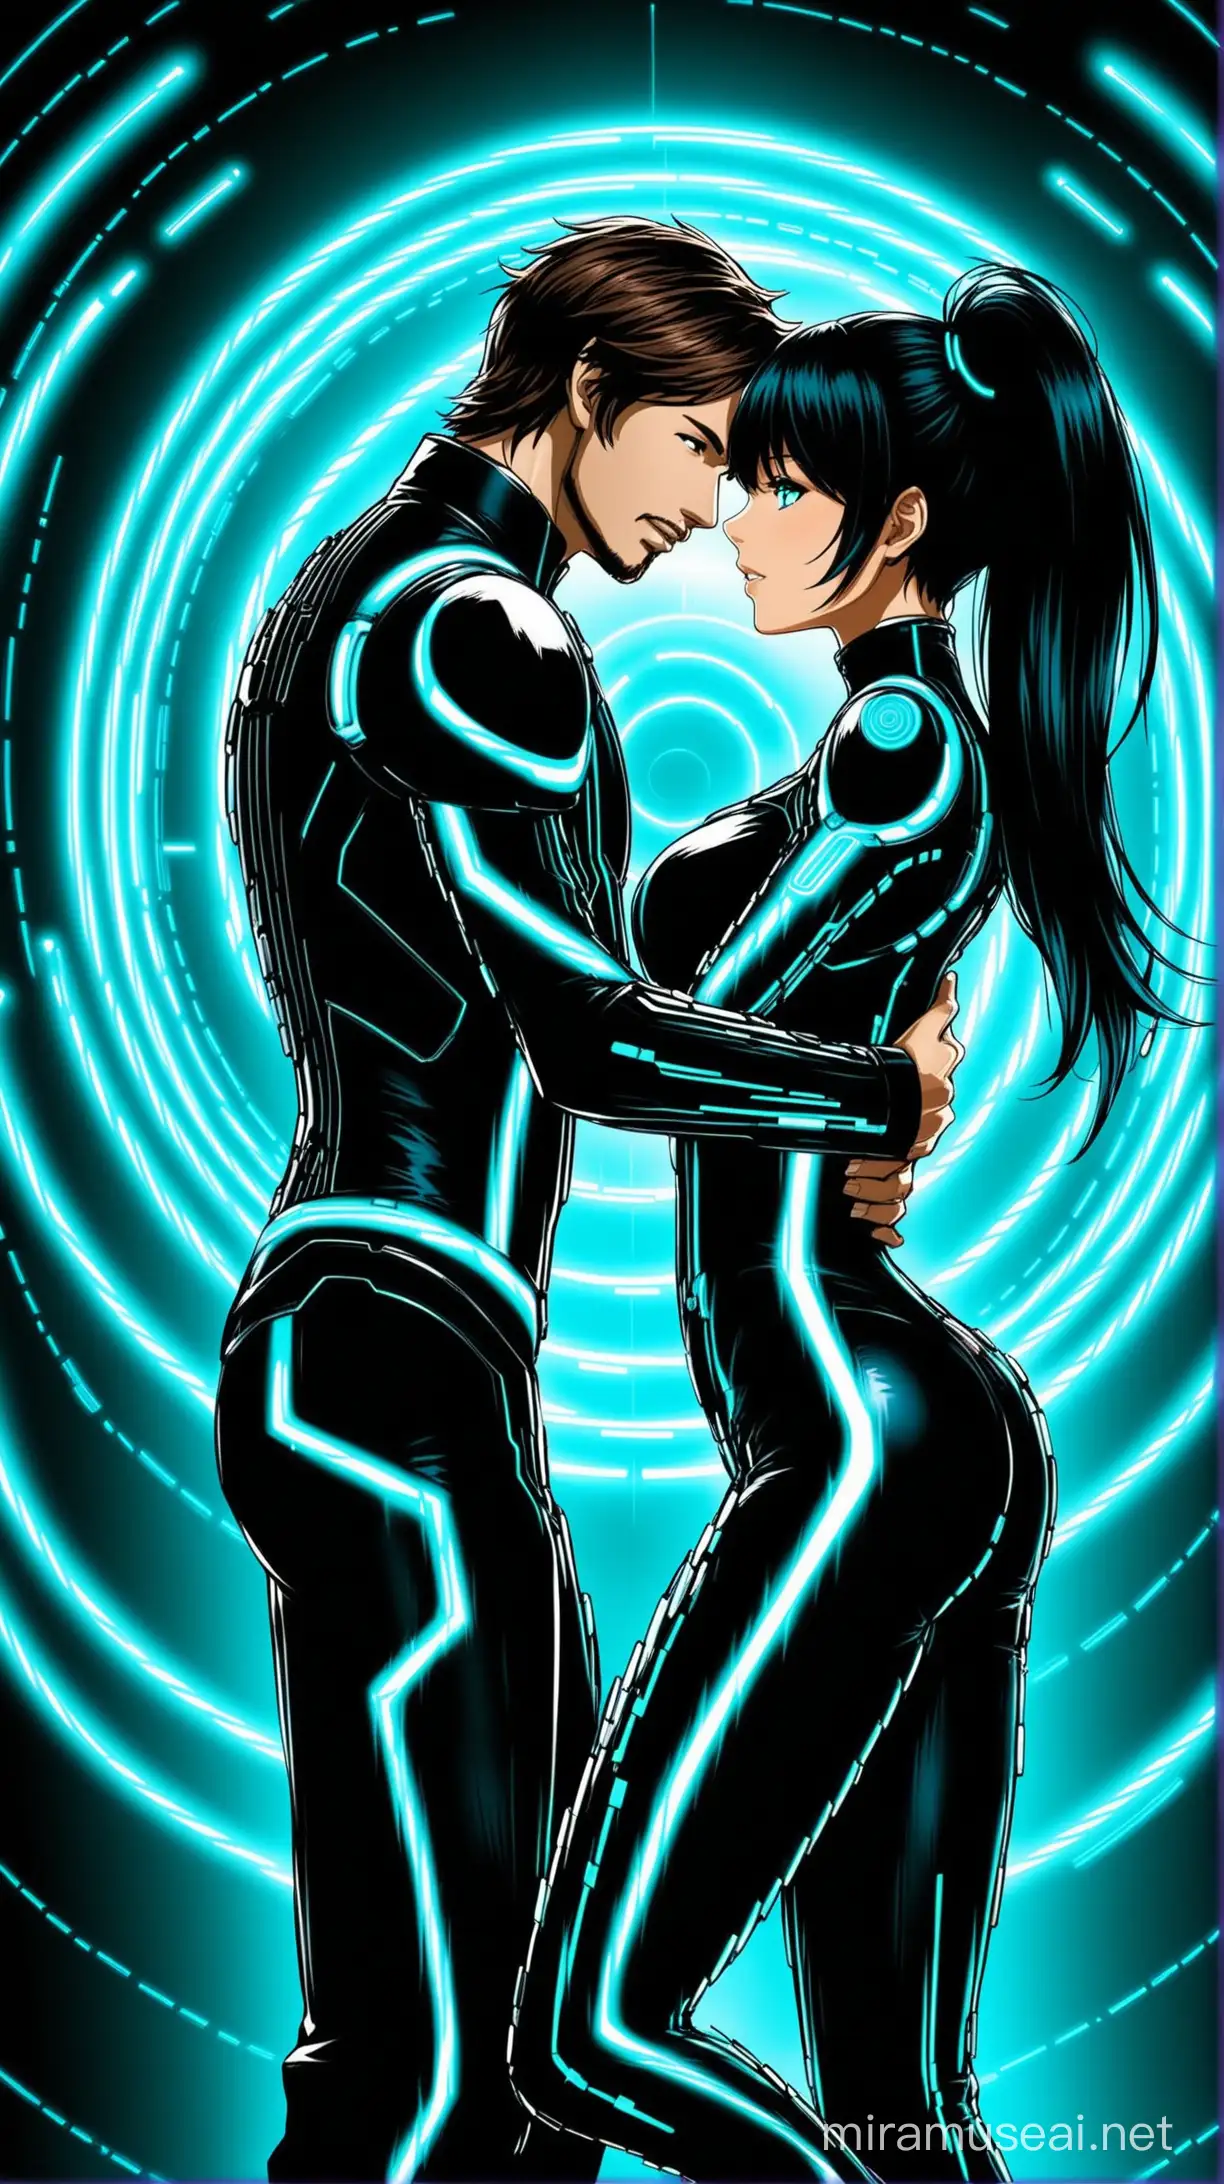 Tron legacy, sam and quorra luv, new age world, passionate luv